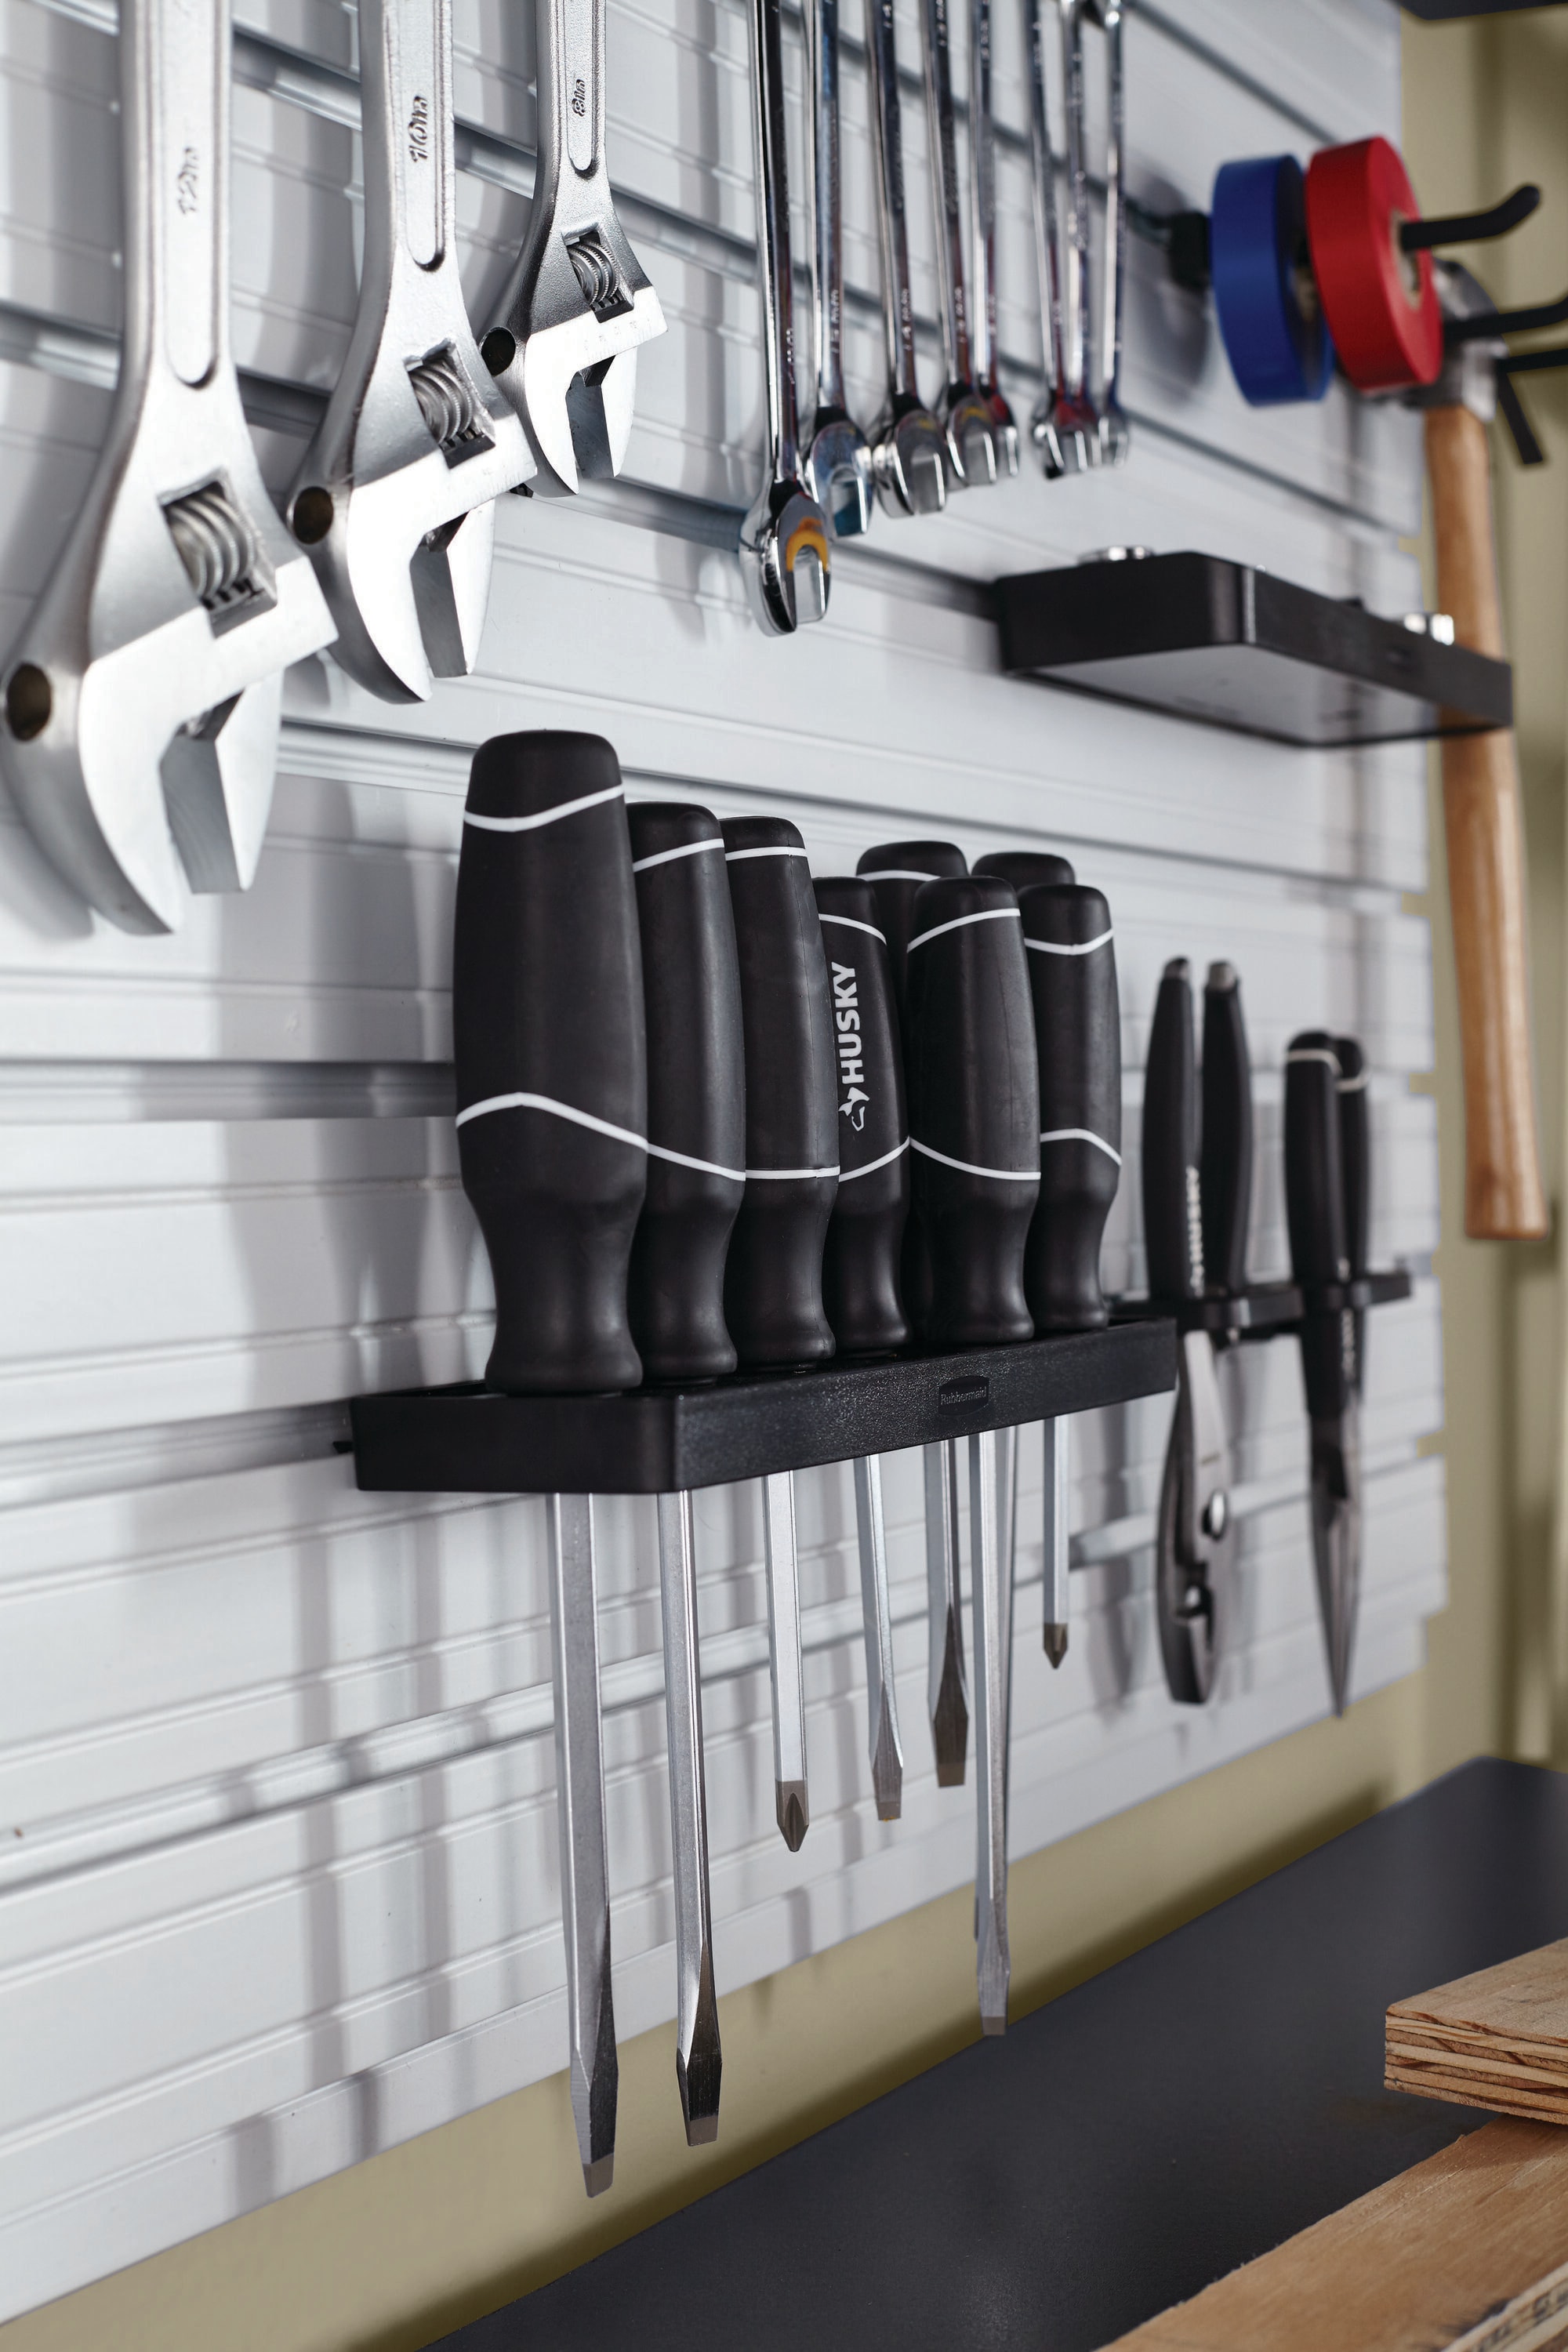  Rubbermaid 20-Piece FastTrack Garage Wall-Mounted